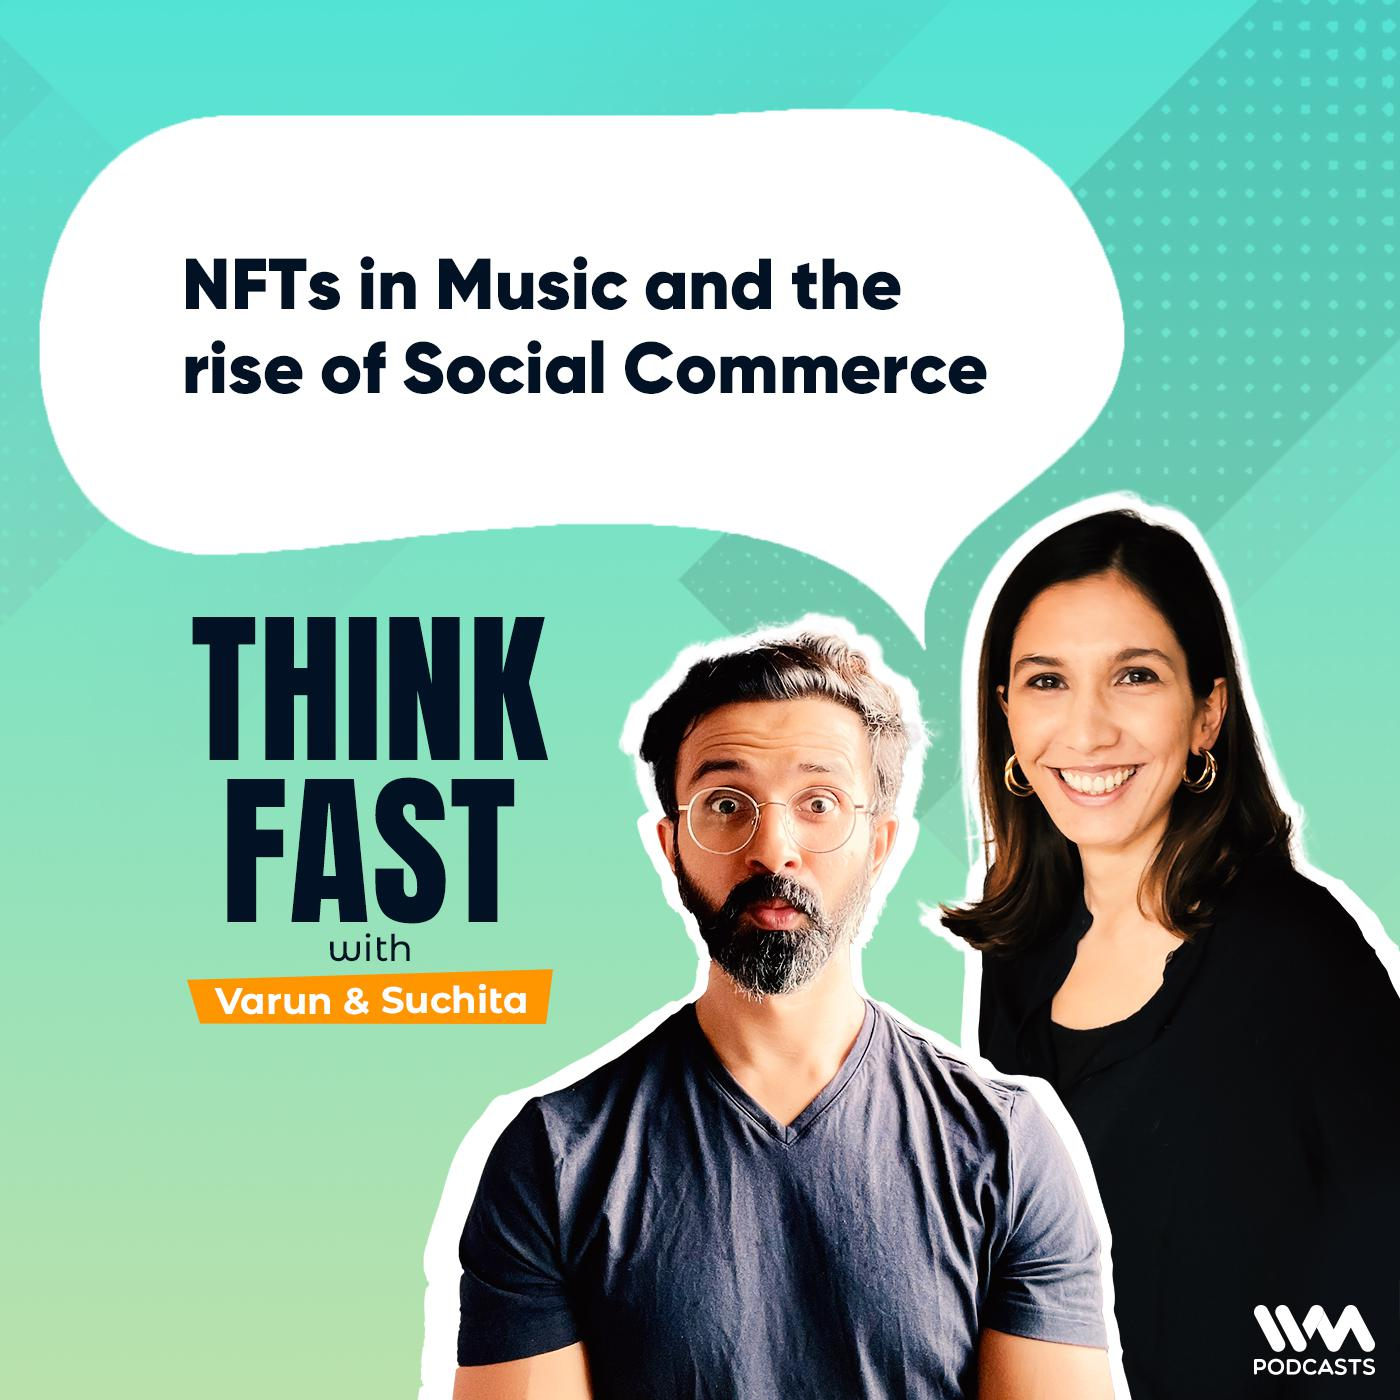 NFTs in Music and the rise of Social Commerce